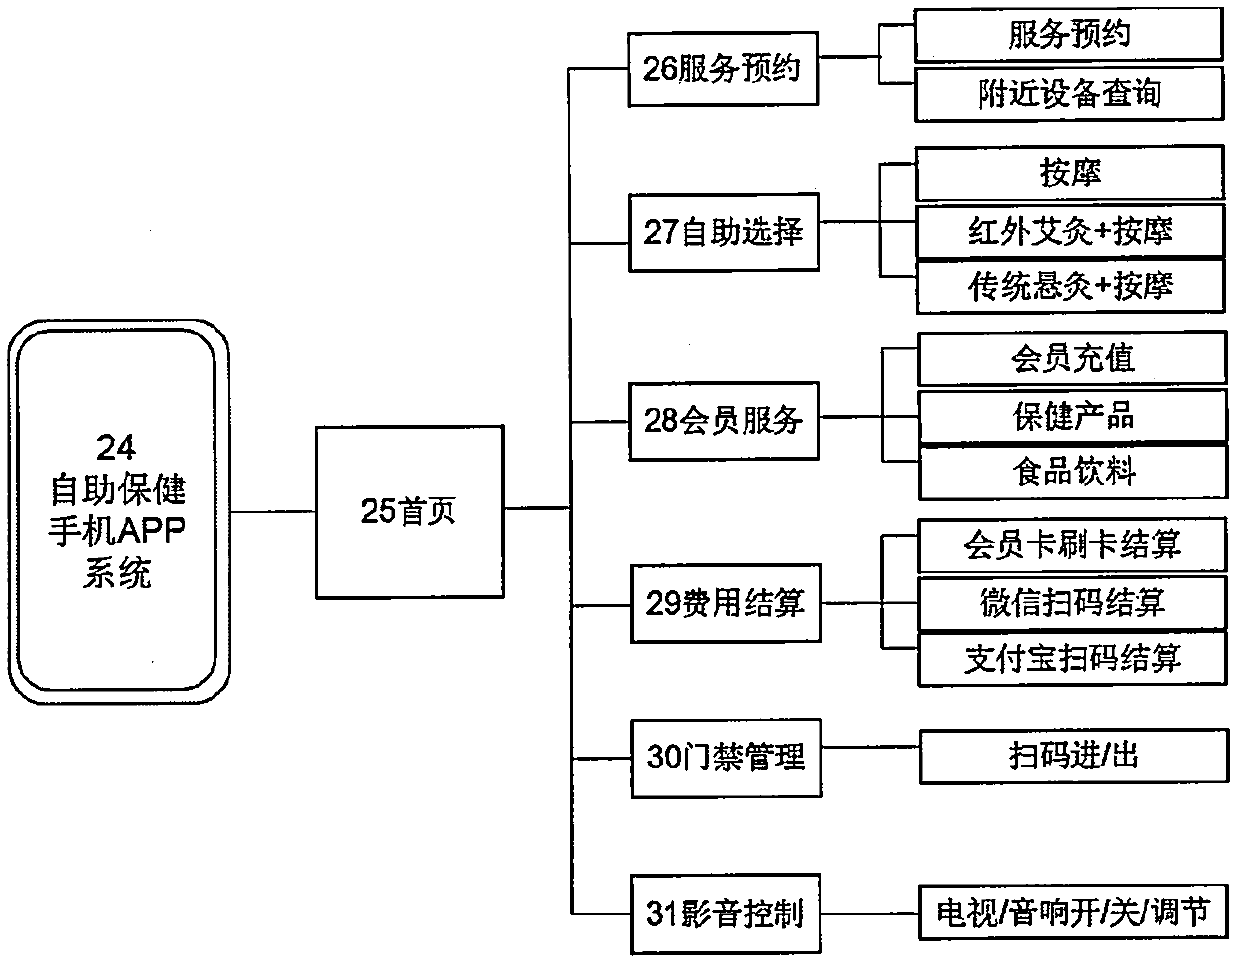 Self-service moxa-moxibustion and massage timing health care kiosk and operation pattern thereof